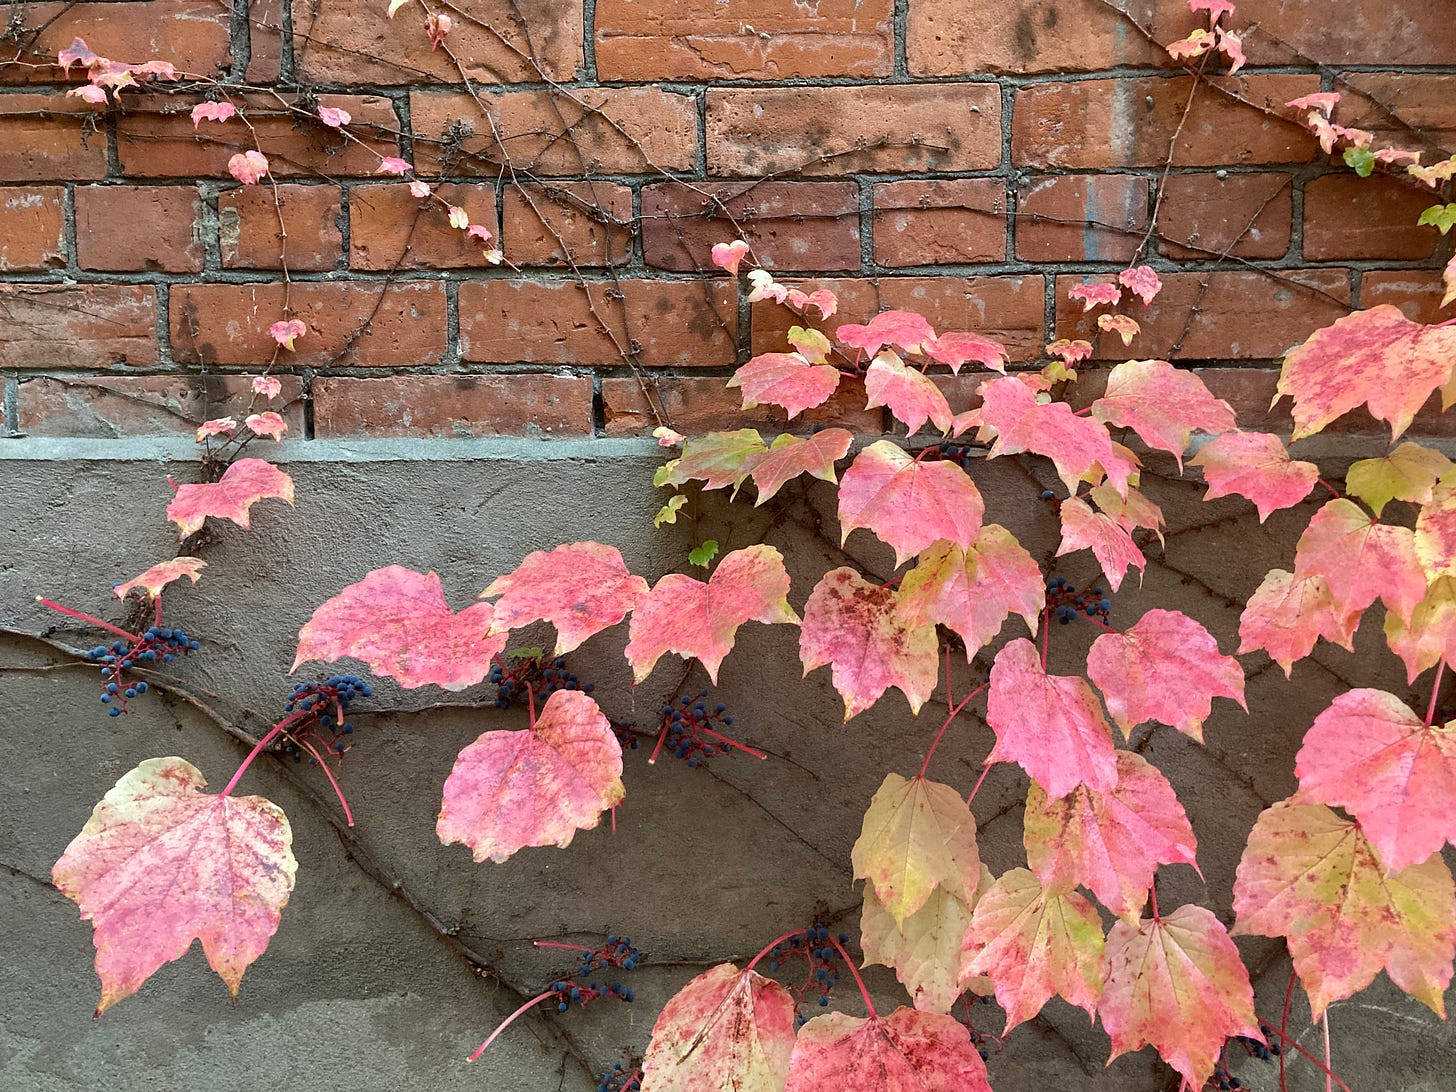 The side of brick building with boston ivy leaves (in ombre reds and yellows). In some places, the leaves have fallen off revealing brown vines and clusters of small blue berries.